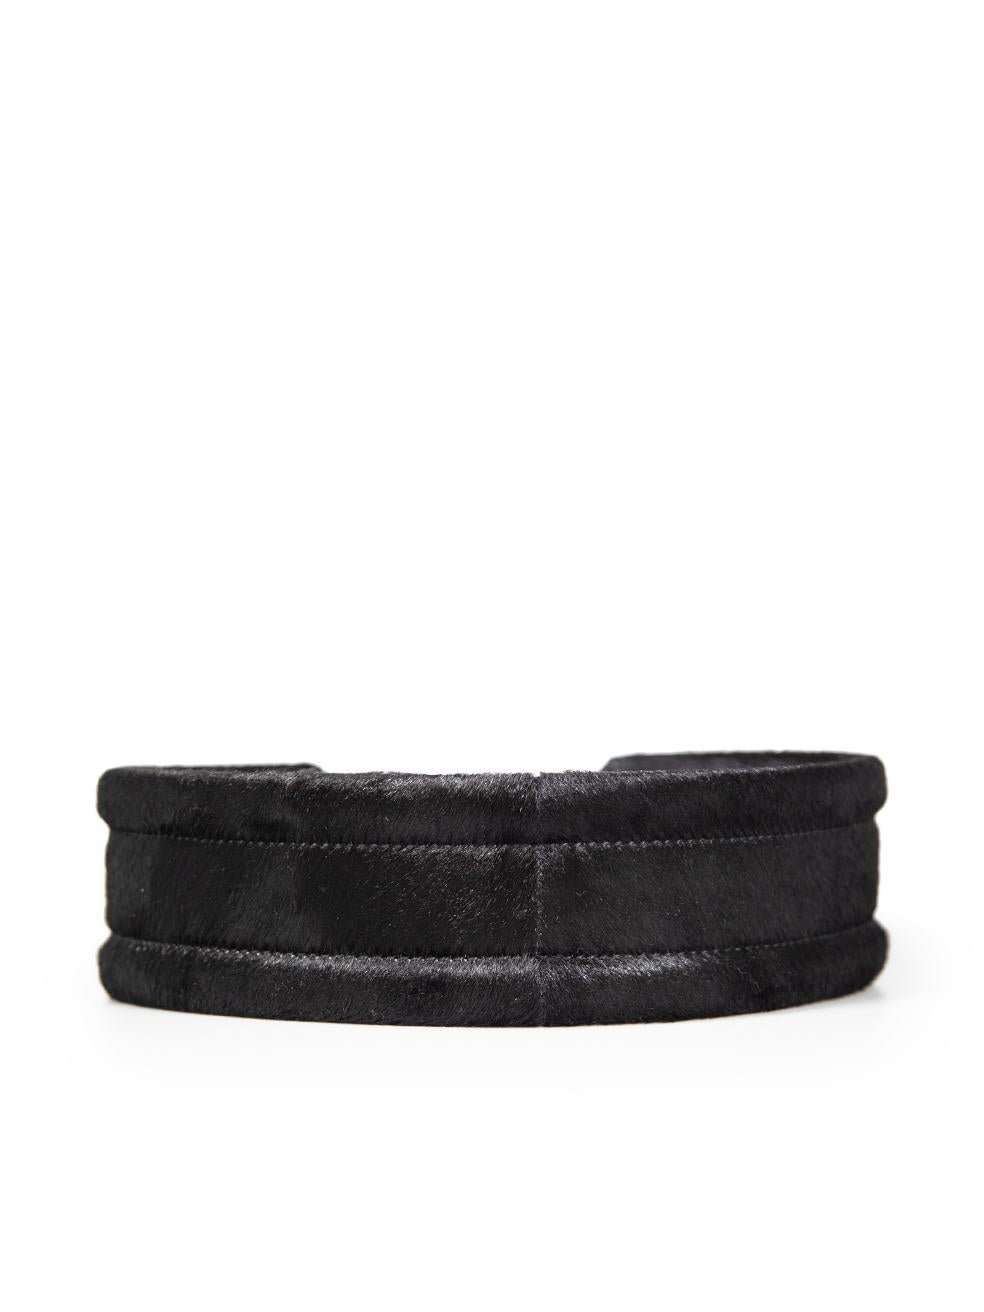 Alexander McQueen Black Pony Hair Wide Belt In Excellent Condition For Sale In London, GB